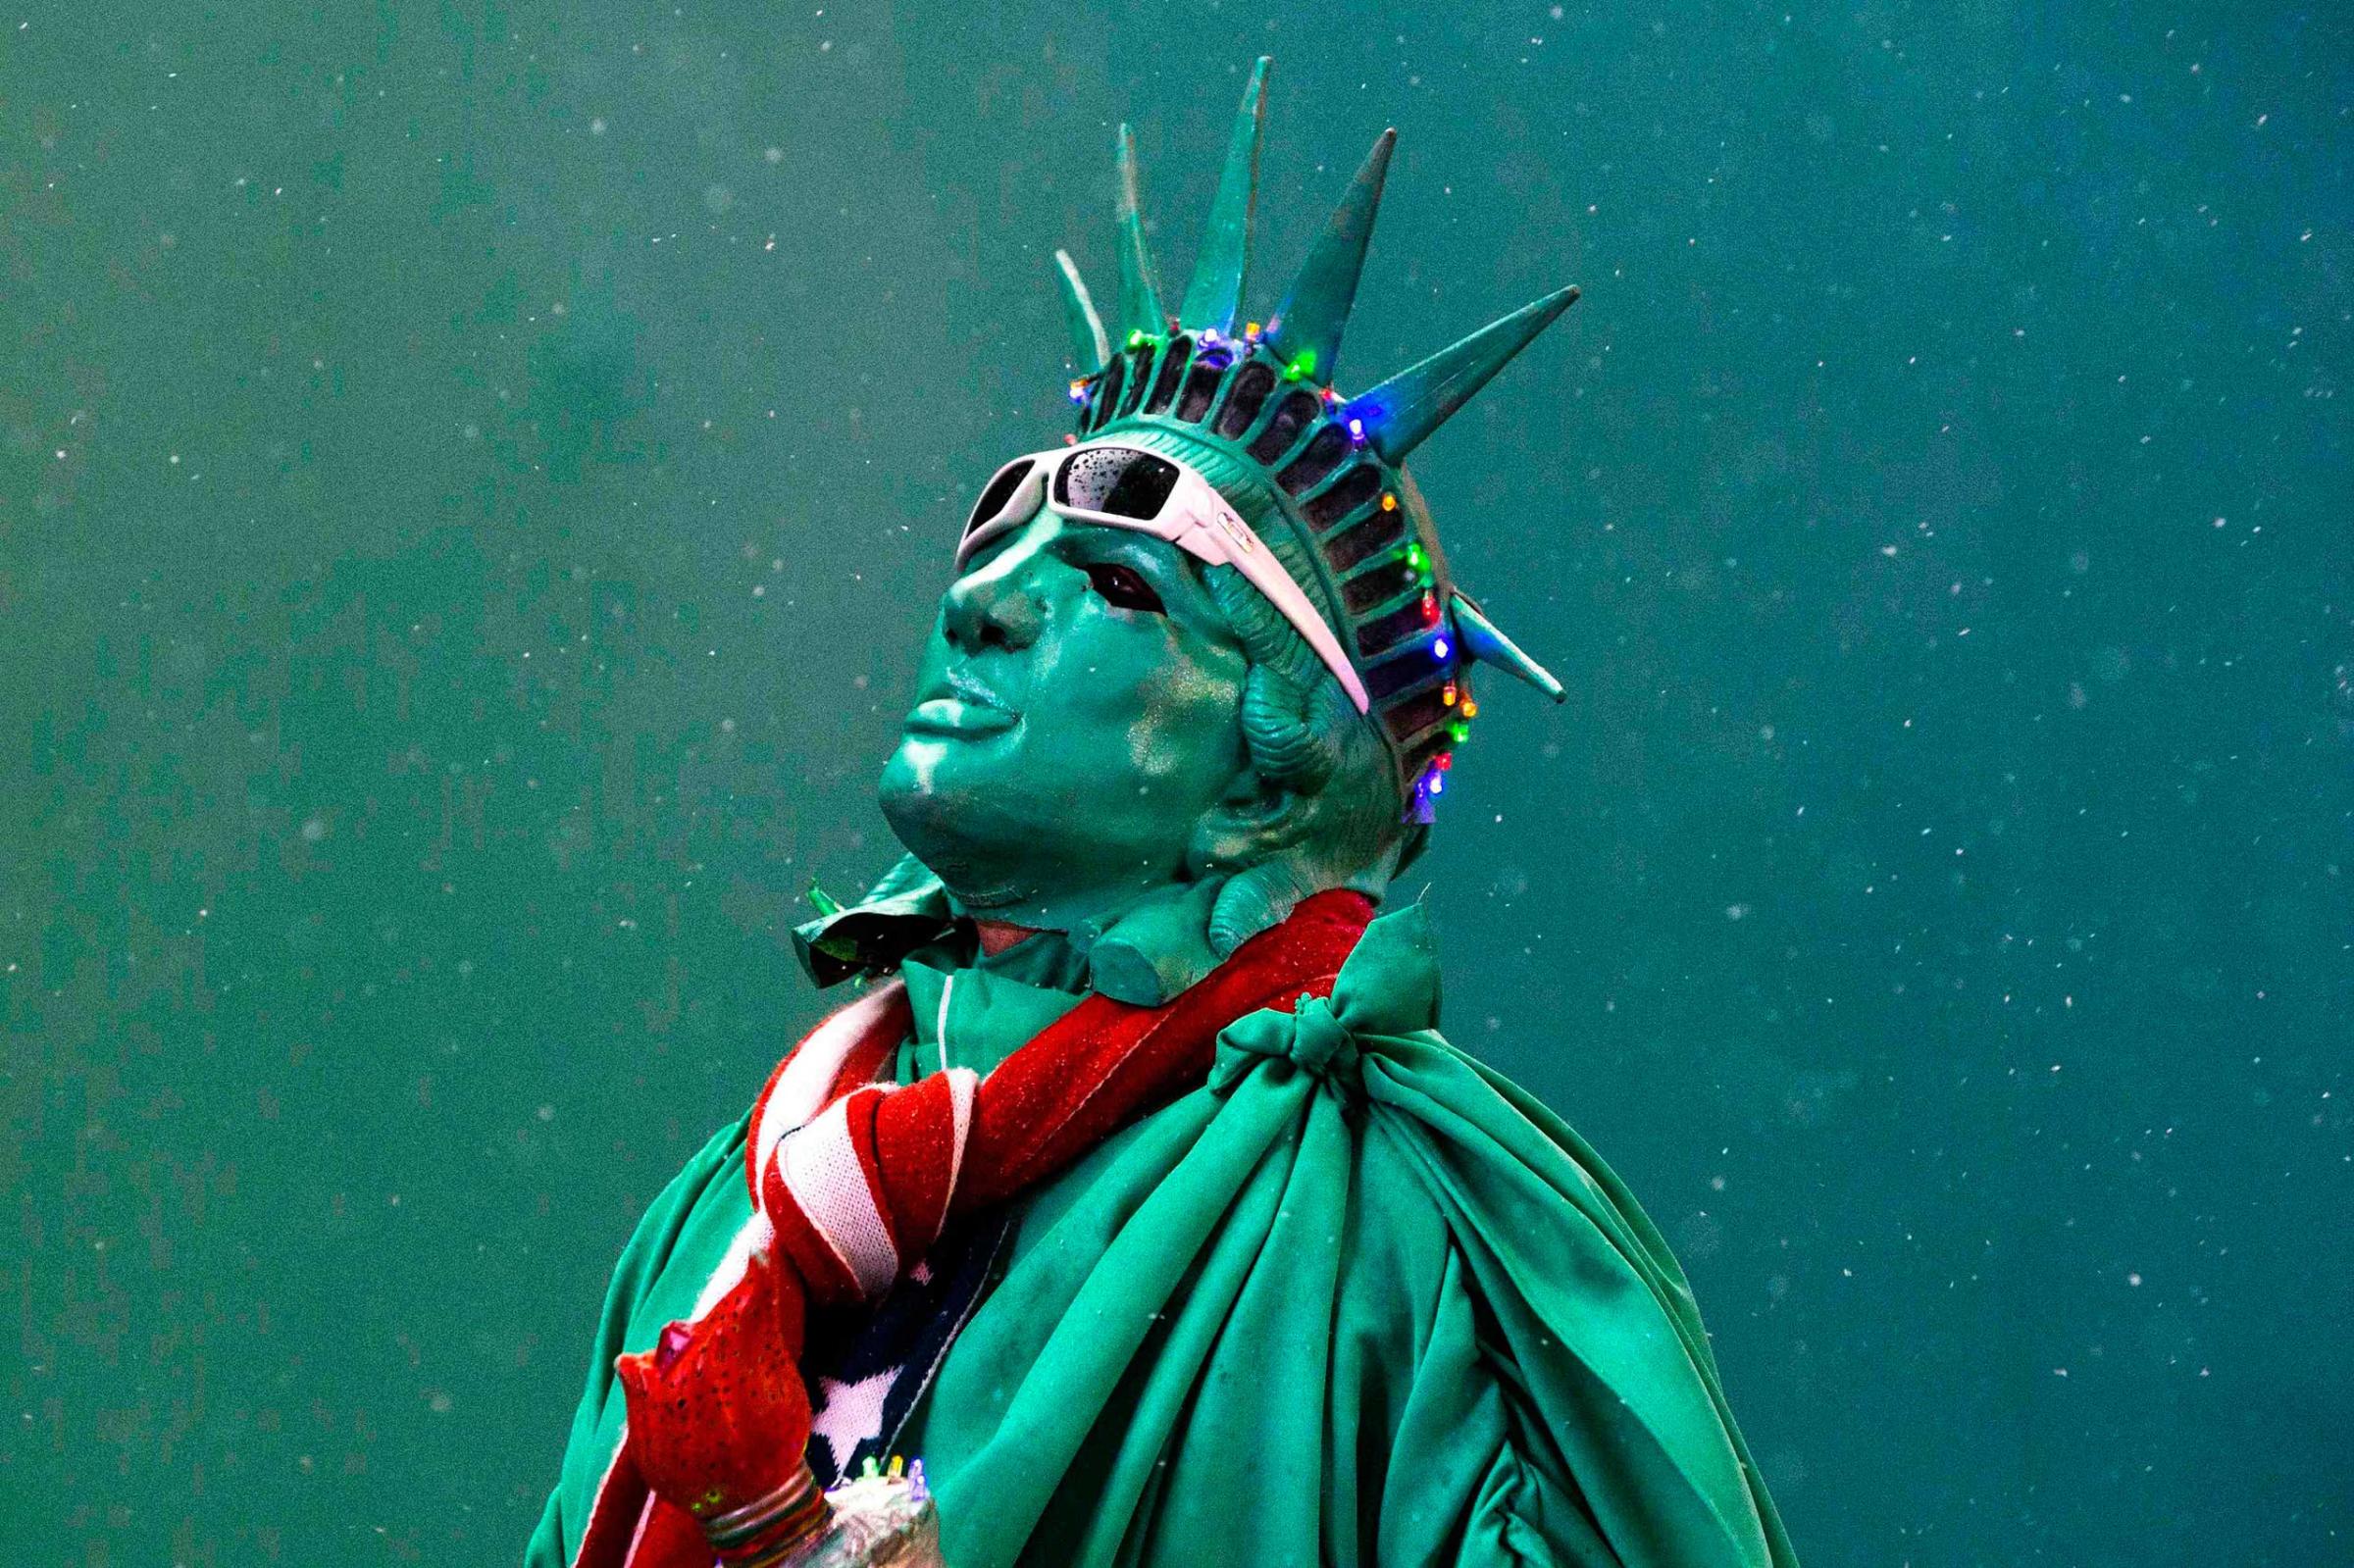 A street performer dressed as the Statue of Liberty stands amongst light snow in Times Square in New York